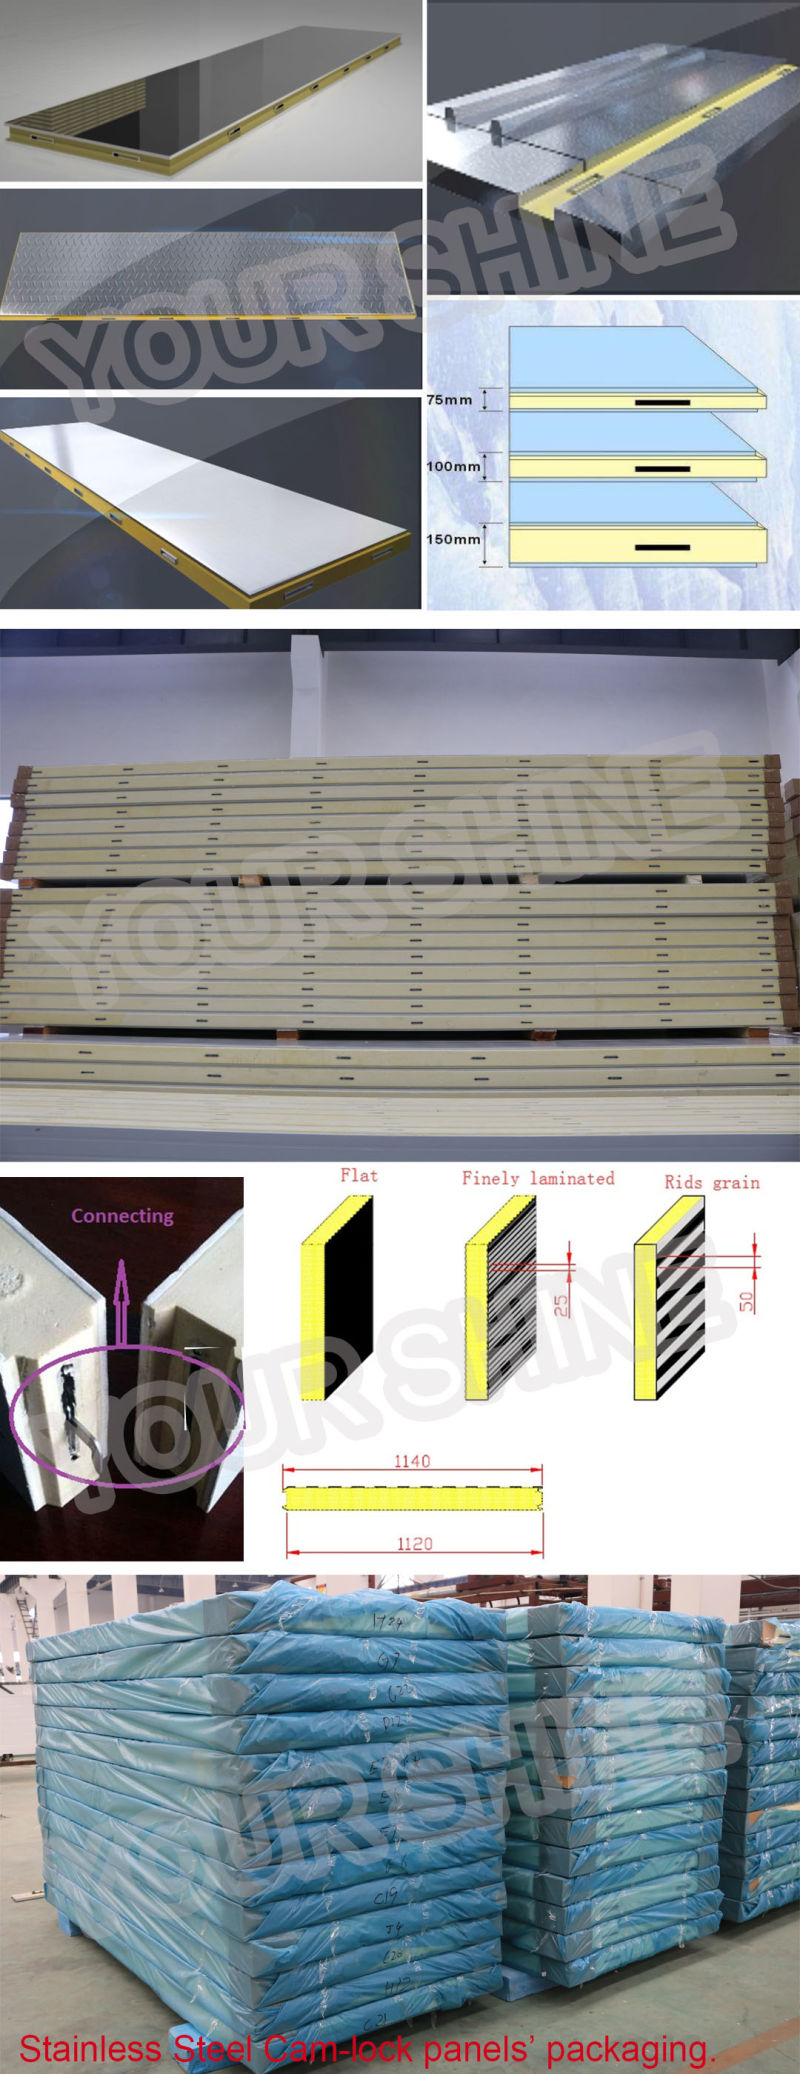 PU Roof Sandwich Panel Price Per Square Meter / Roof Panel